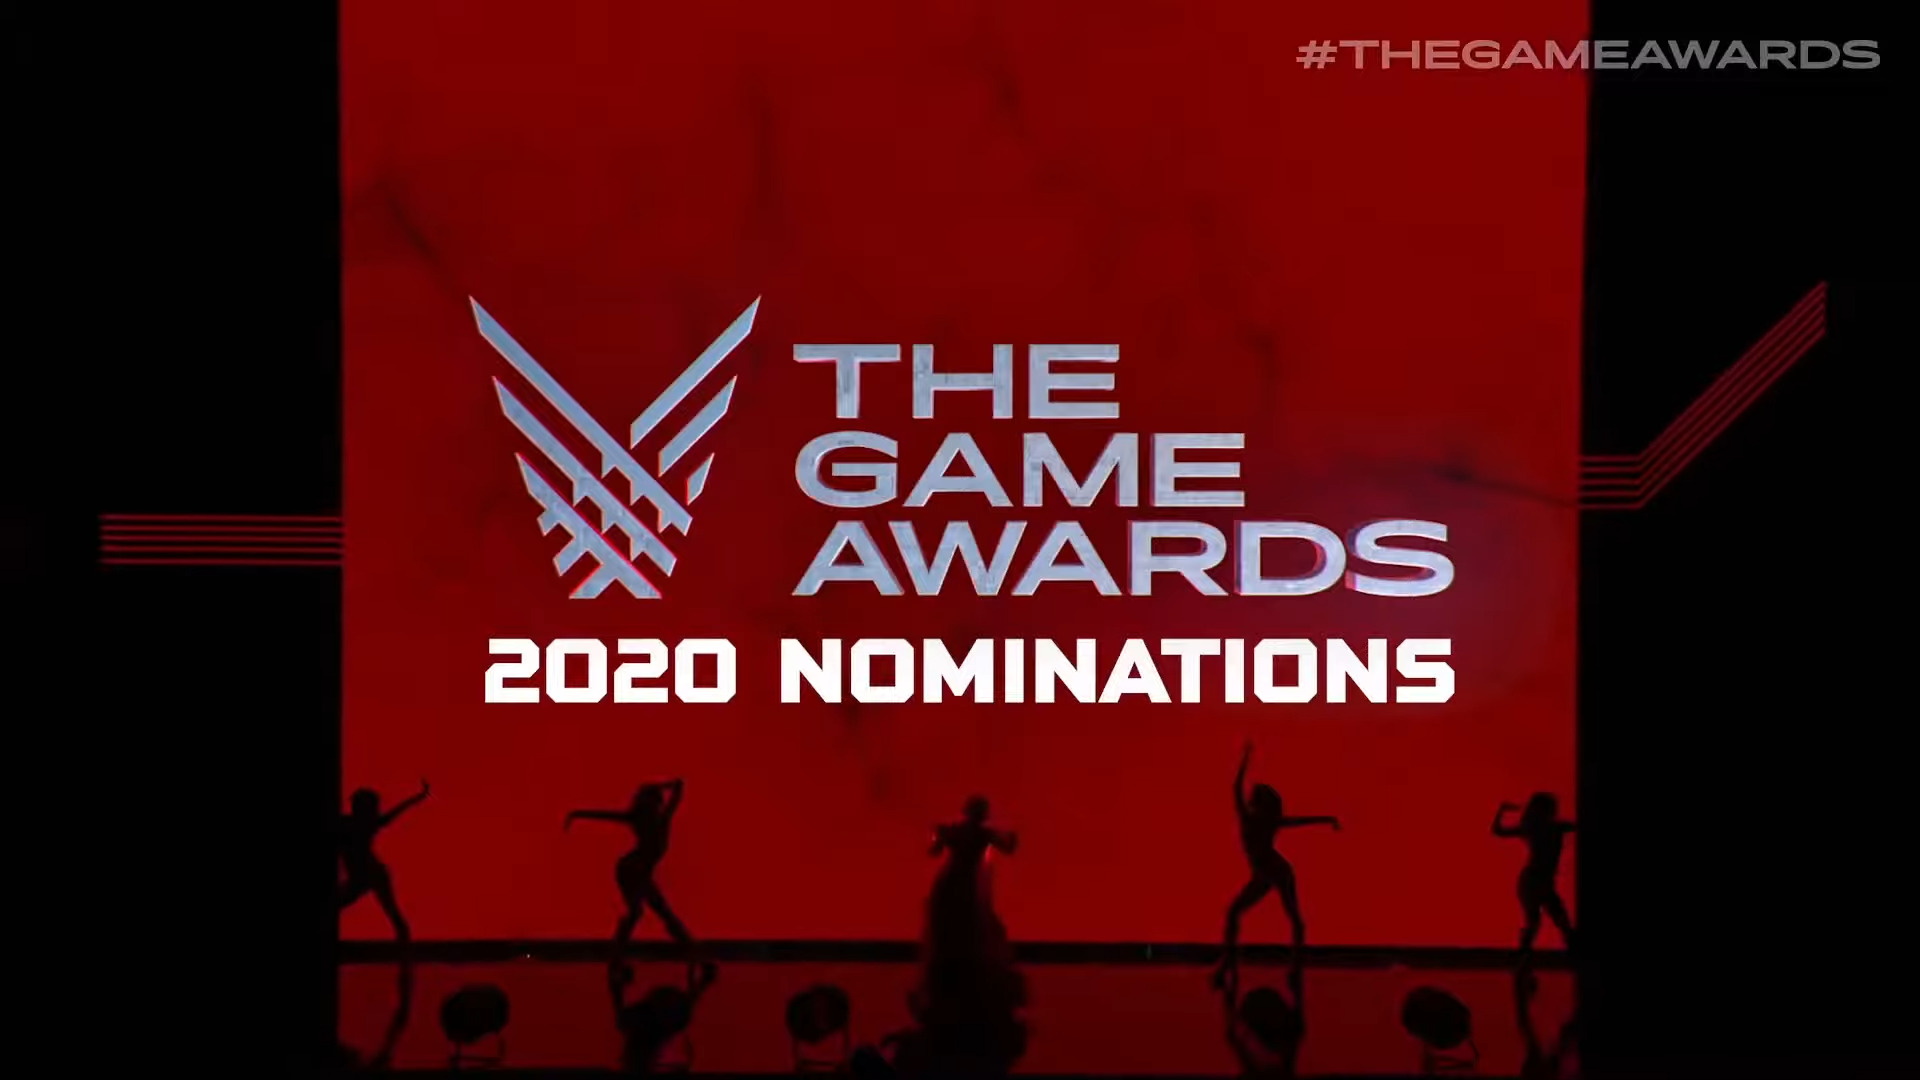 New Trailer For The Game Awards Seeks To Build Hype For The Annual Event With Linkin Park Music